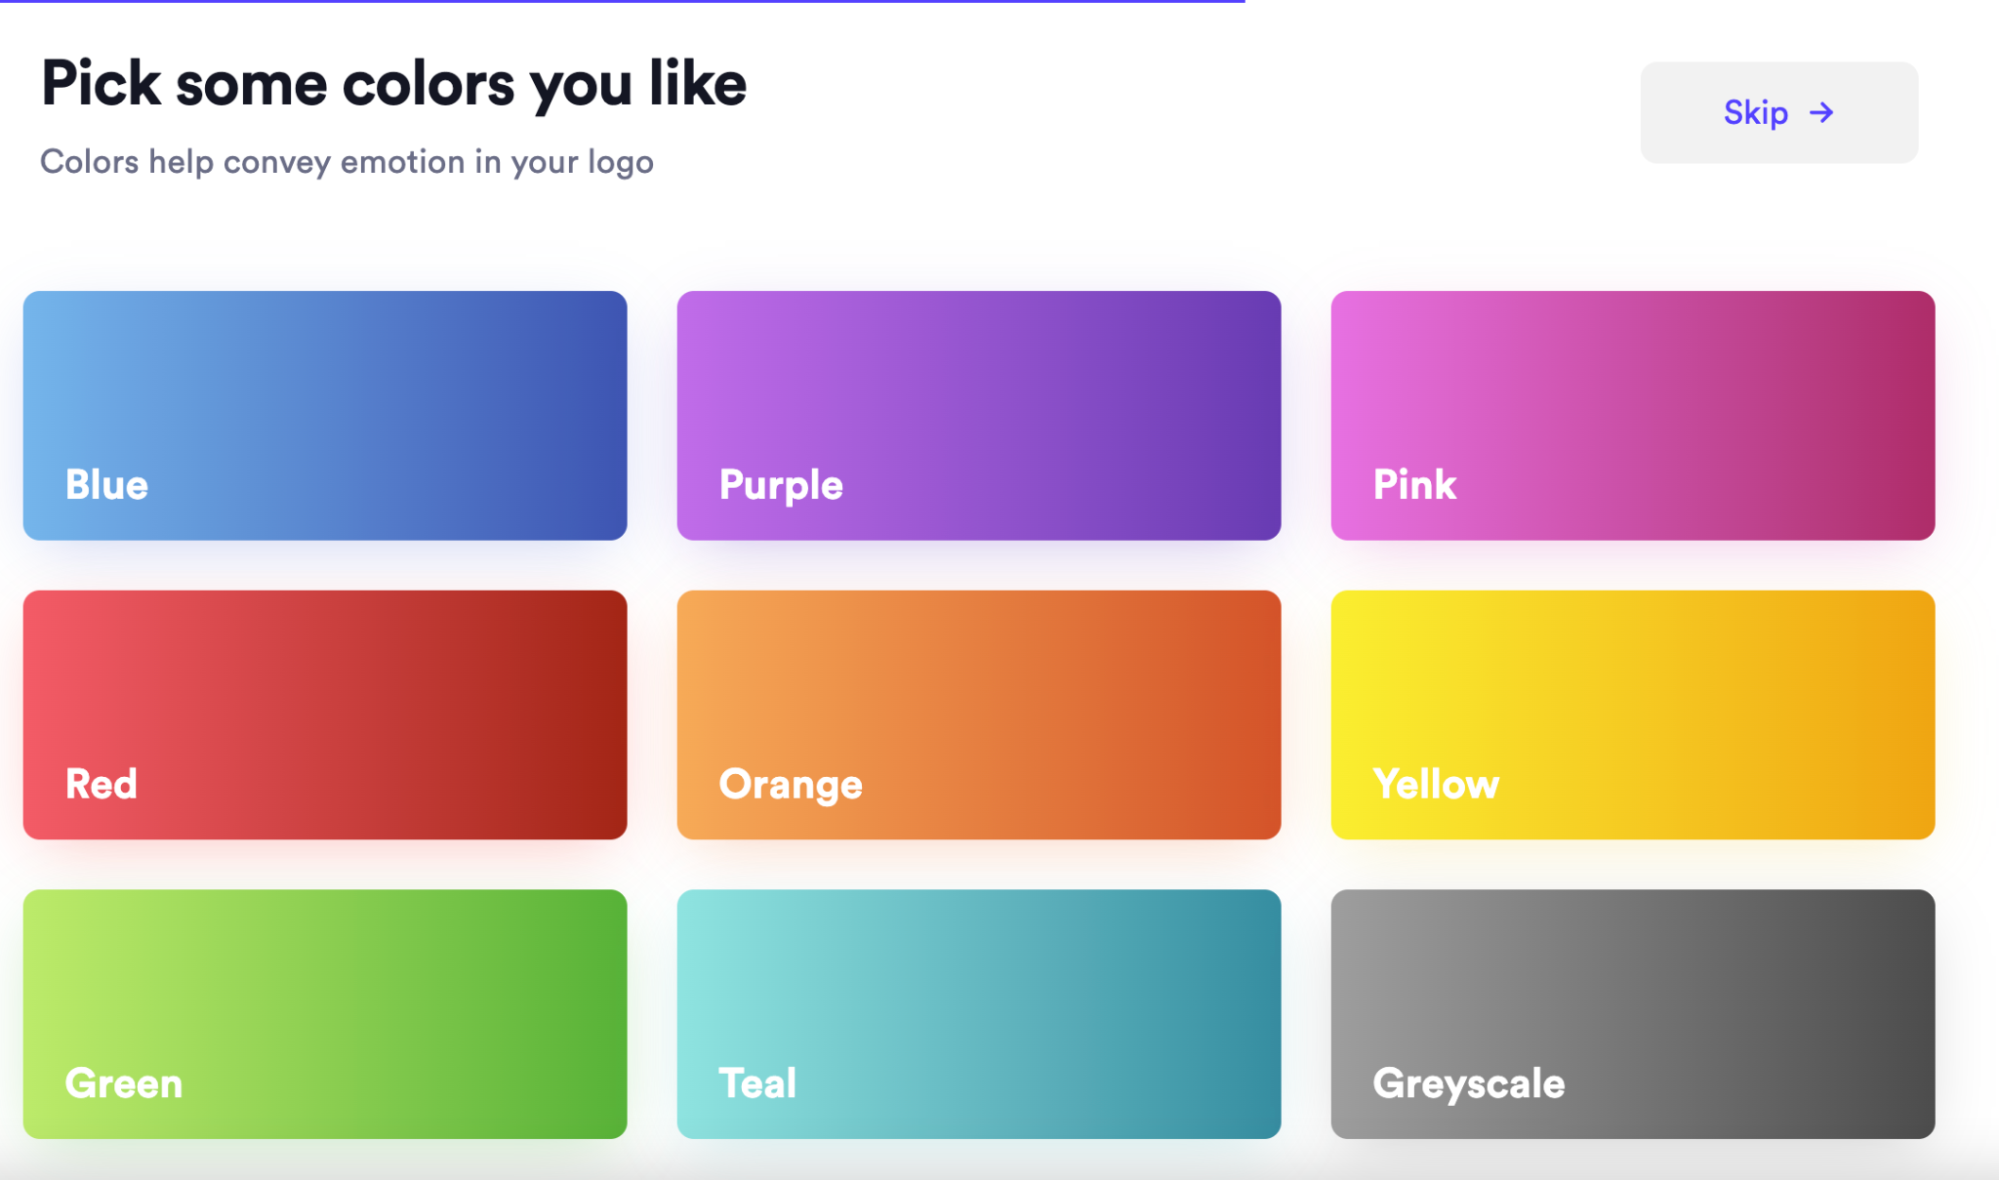 List of color options